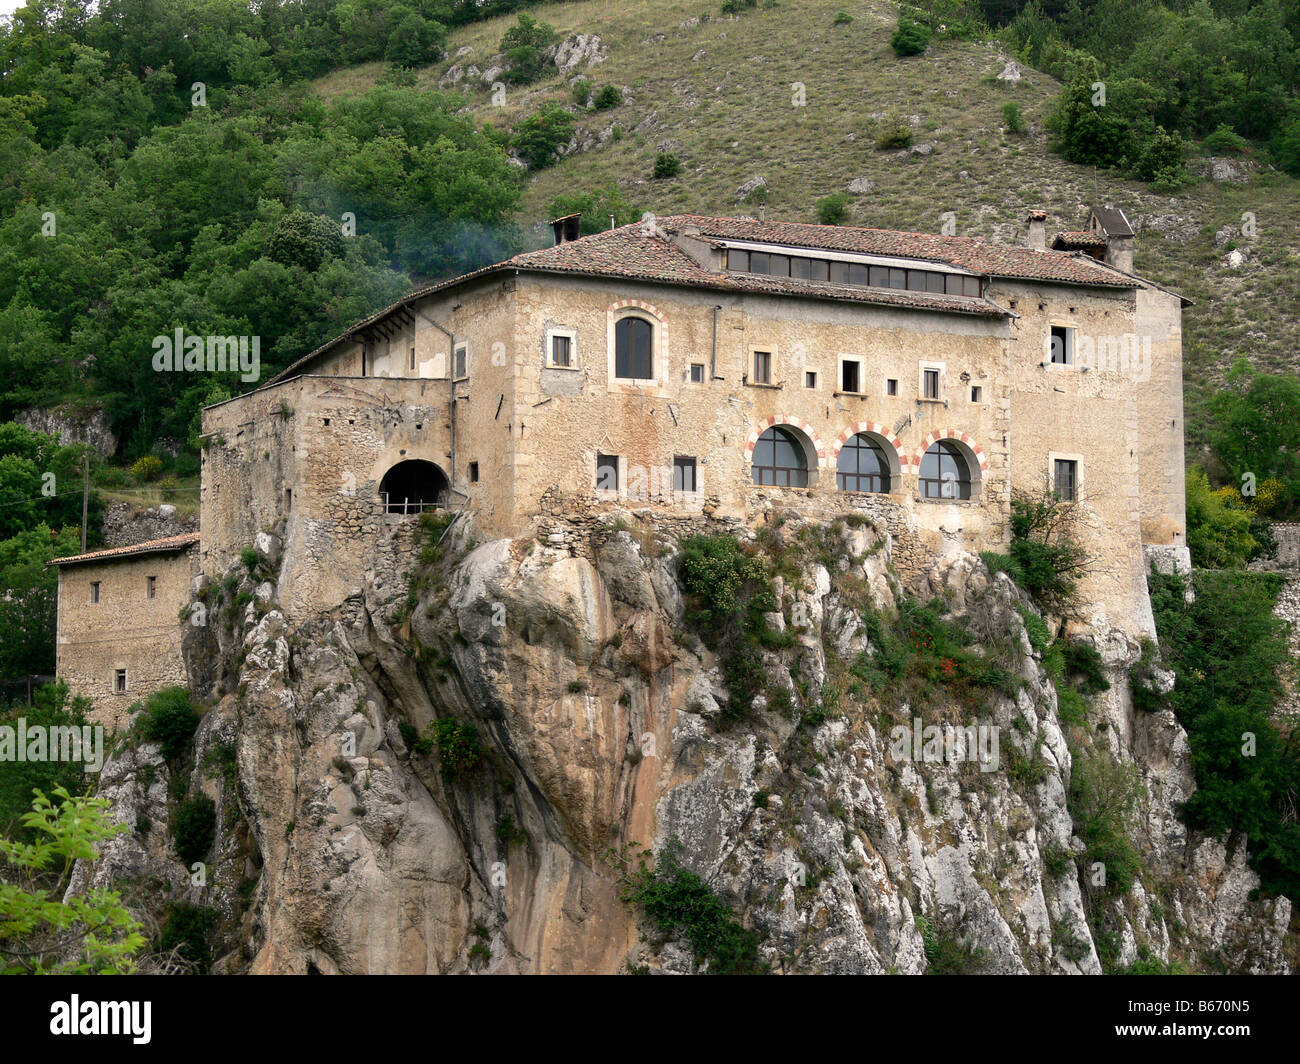 Convent of Sant Angelo d'Ocre, near Fossa, L'Aquila, in the Abruzzo region of central Italy. Stock Photo